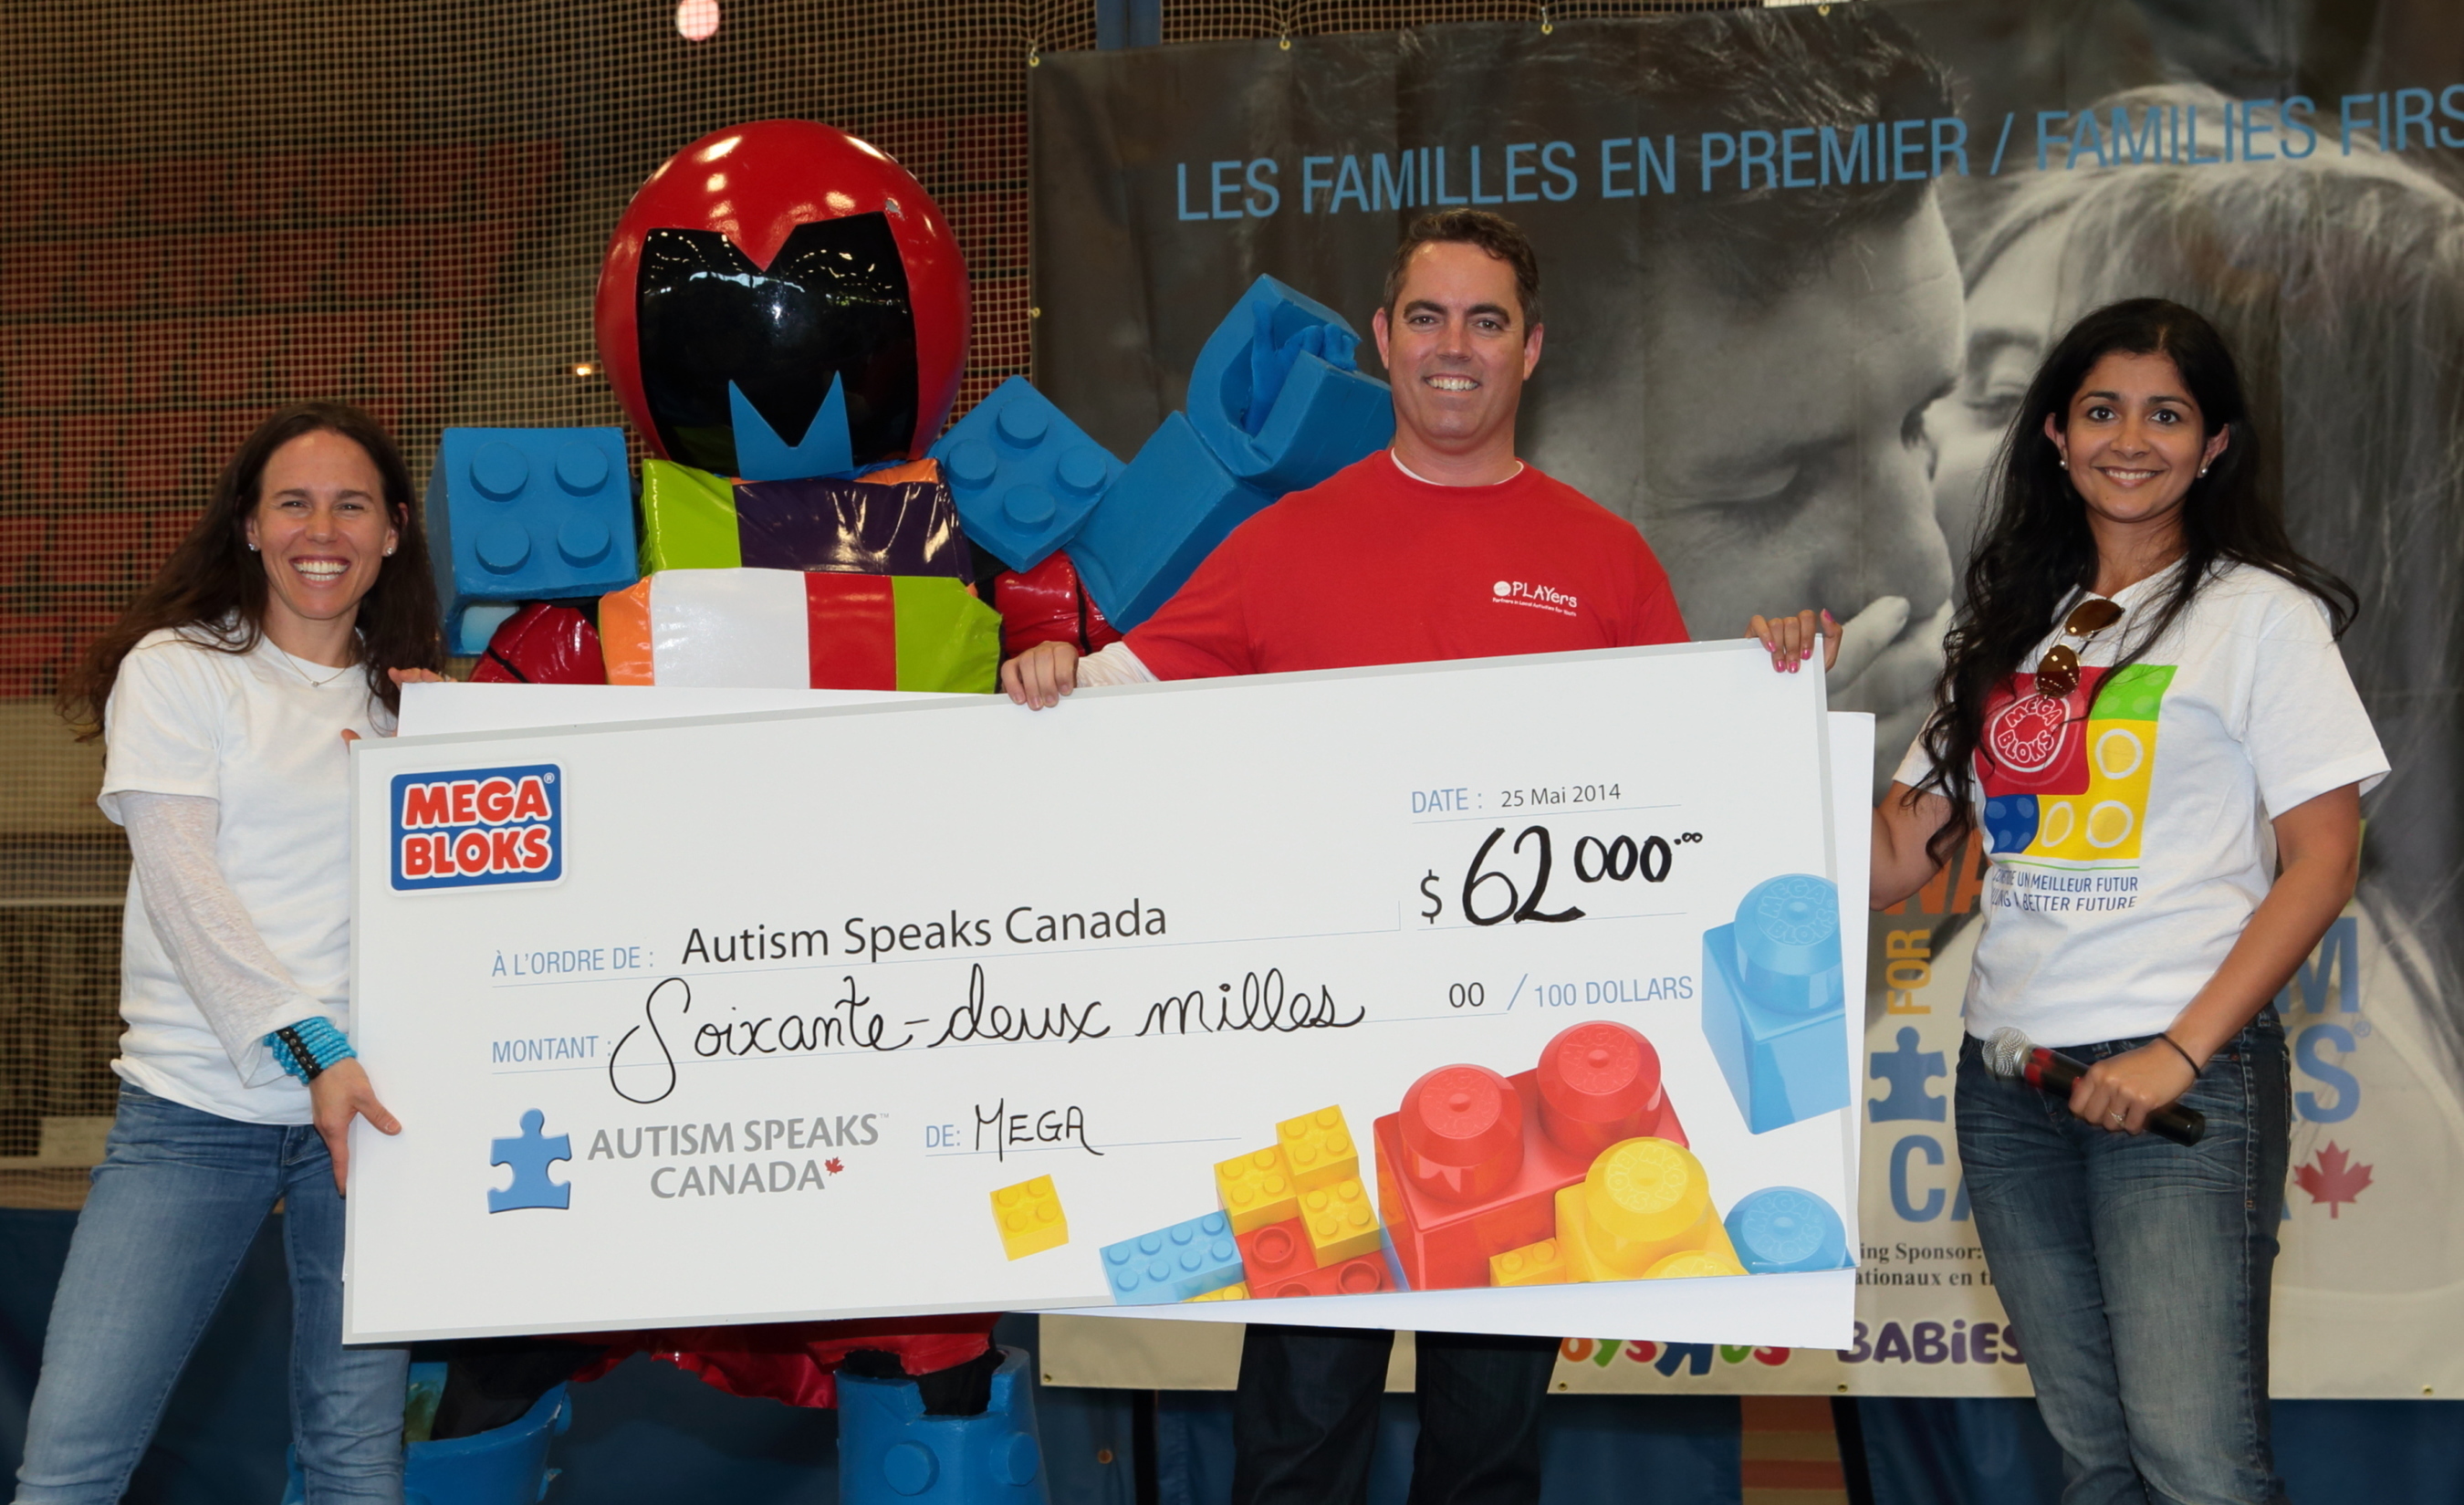 Executive Director of Autism Speaks Canada, Jill Farber, (left) accepts a donation from Robert Goodwin, Executive Director of the Mattel Children's Foundation, and Bisma Ansari, Vice President of Marketing at MEGA Brands Inc., at the Montreal Walk Now for Autism Speaks Canada fundraising event on May 25, 2014. (PRNewsFoto/MEGA Brands Inc.)